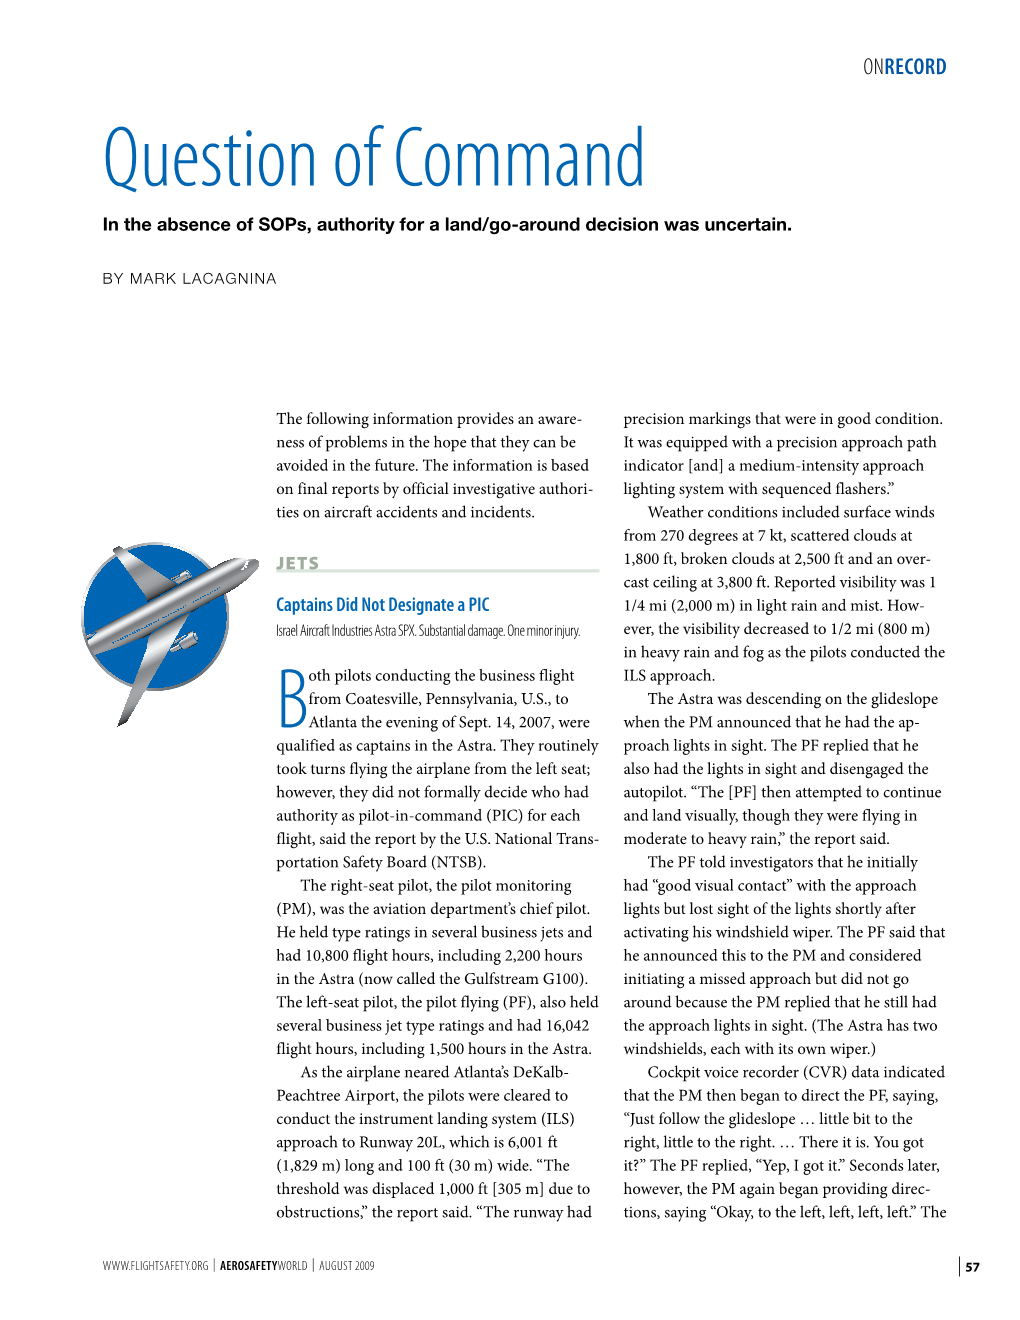 Question of Command in the Absence of Sops, Authority for a Land/Go-Around Decision Was Uncertain